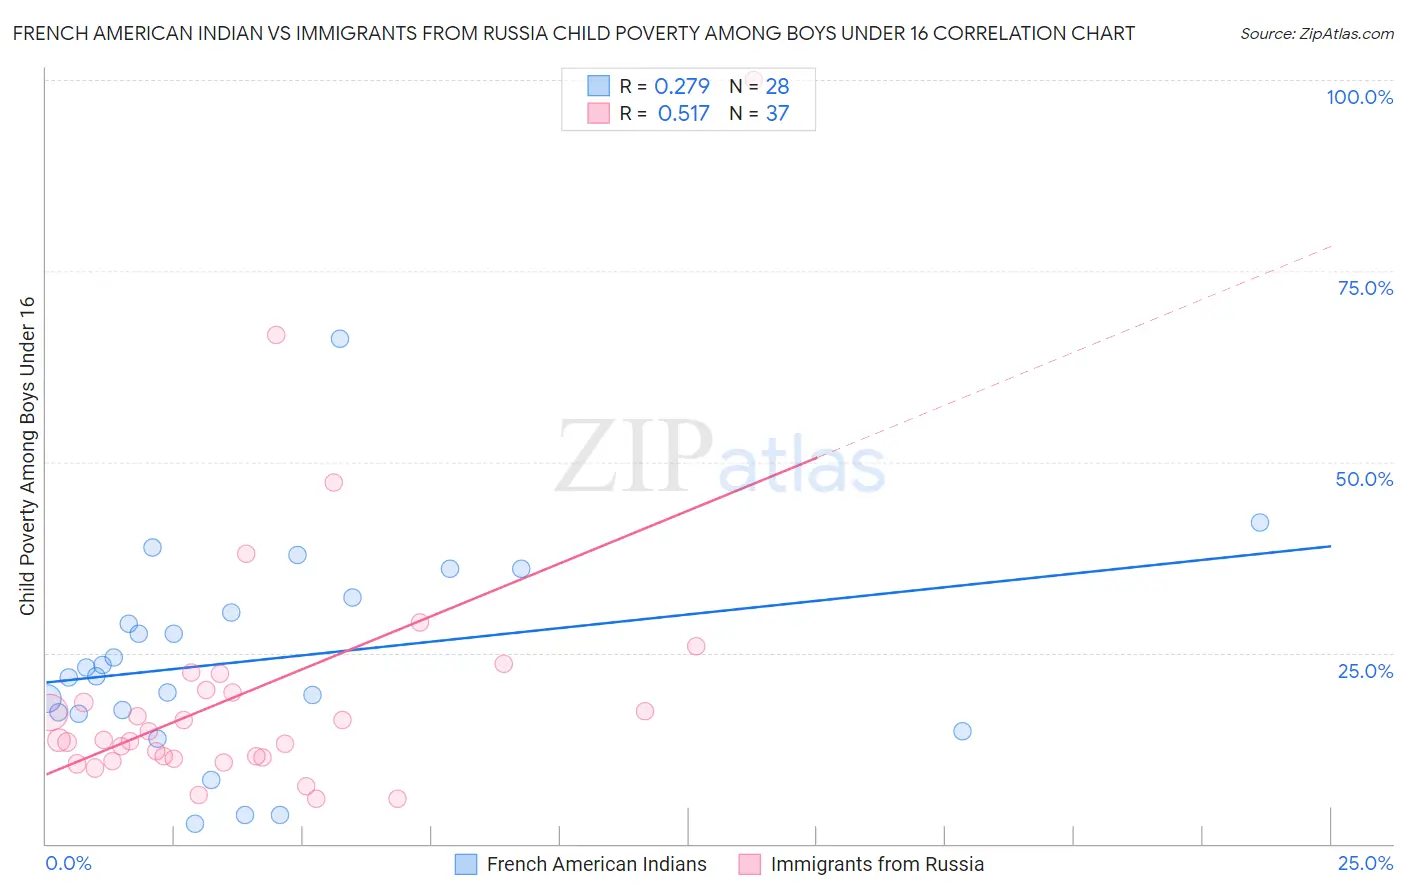 French American Indian vs Immigrants from Russia Child Poverty Among Boys Under 16